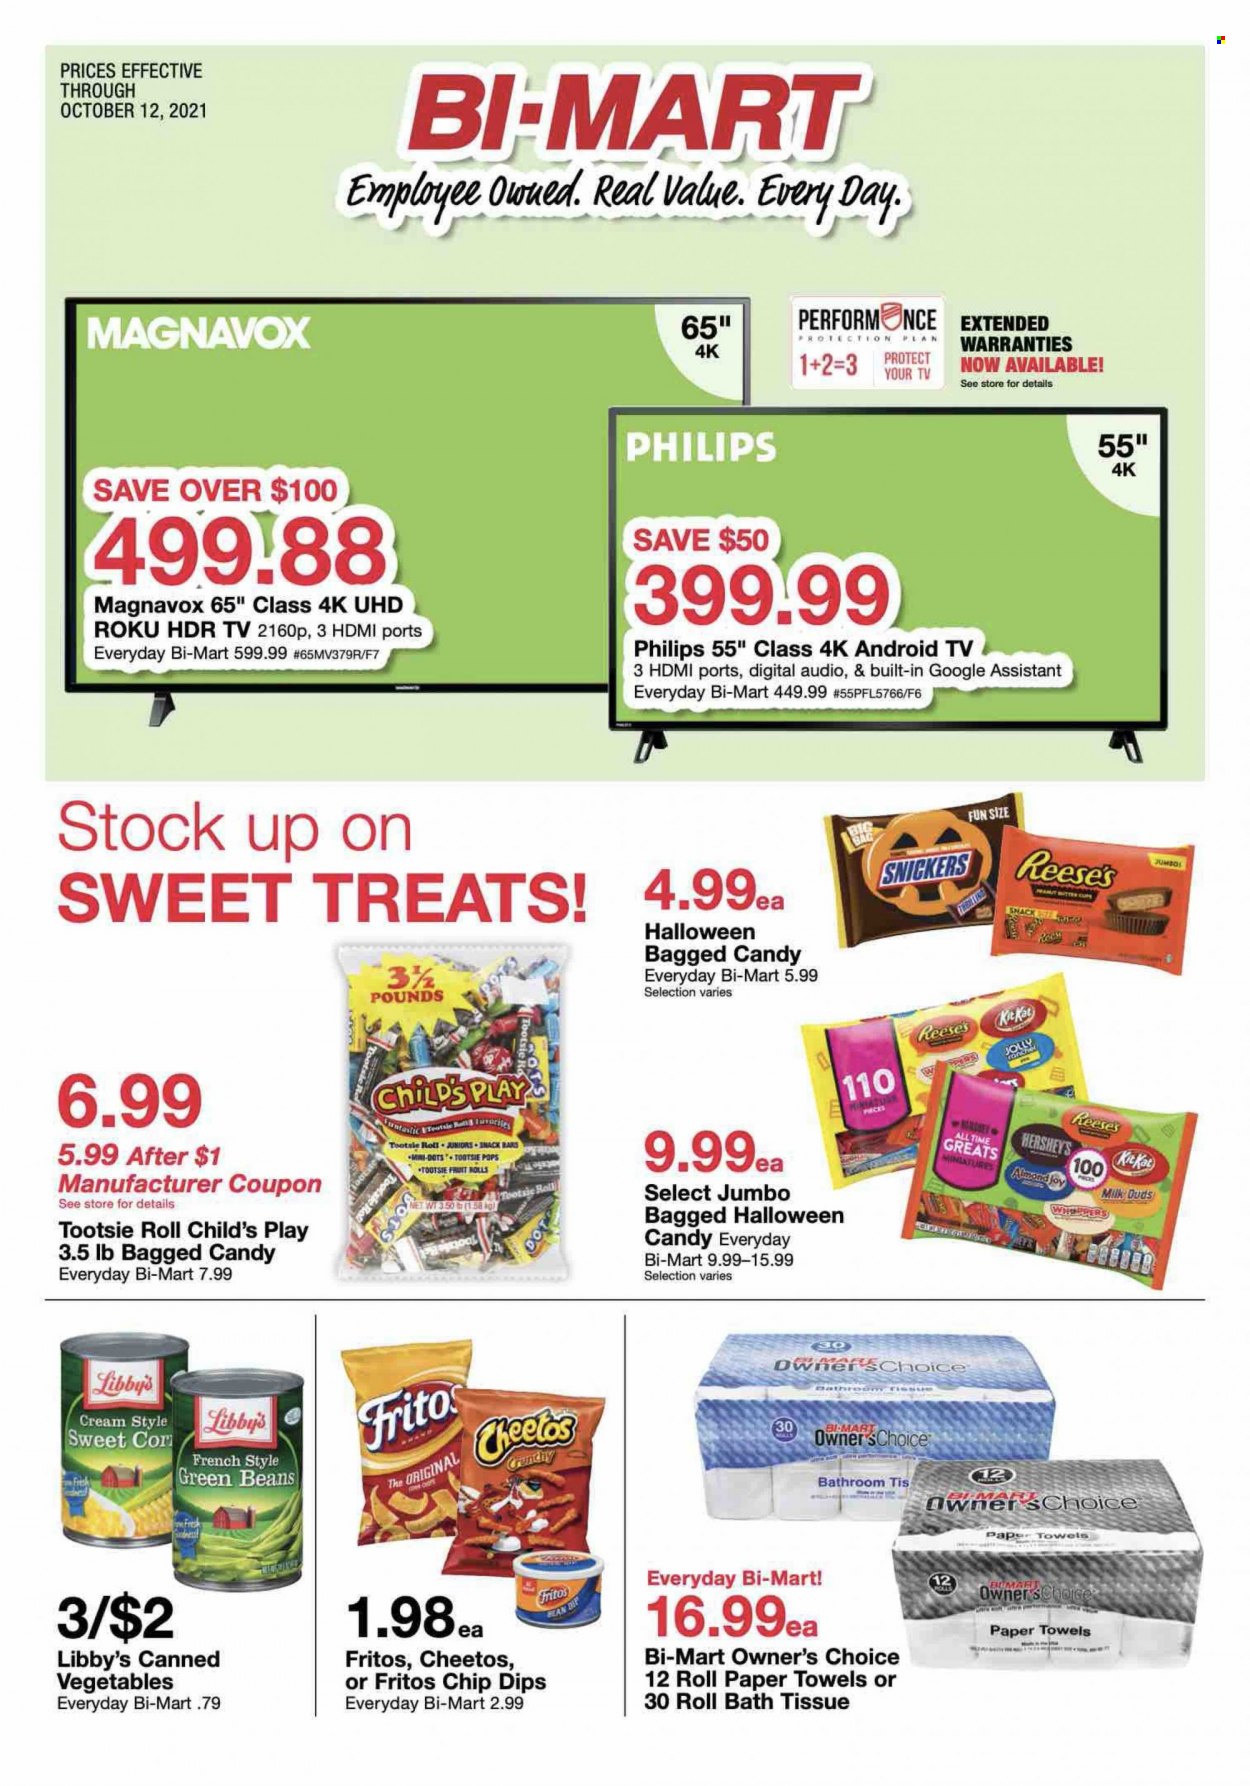 thumbnail - Bi-Mart Flyer - 09/28/2021 - 10/12/2021 - Sales products - Philips, beans, green beans, dip, Reese's, Hershey's, Milk Duds, Snickers, fruit rolls, Fritos, Cheetos, canned vegetables, bath tissue, kitchen towels, paper towels, Joy, bag, Android TV, TV. Page 1.